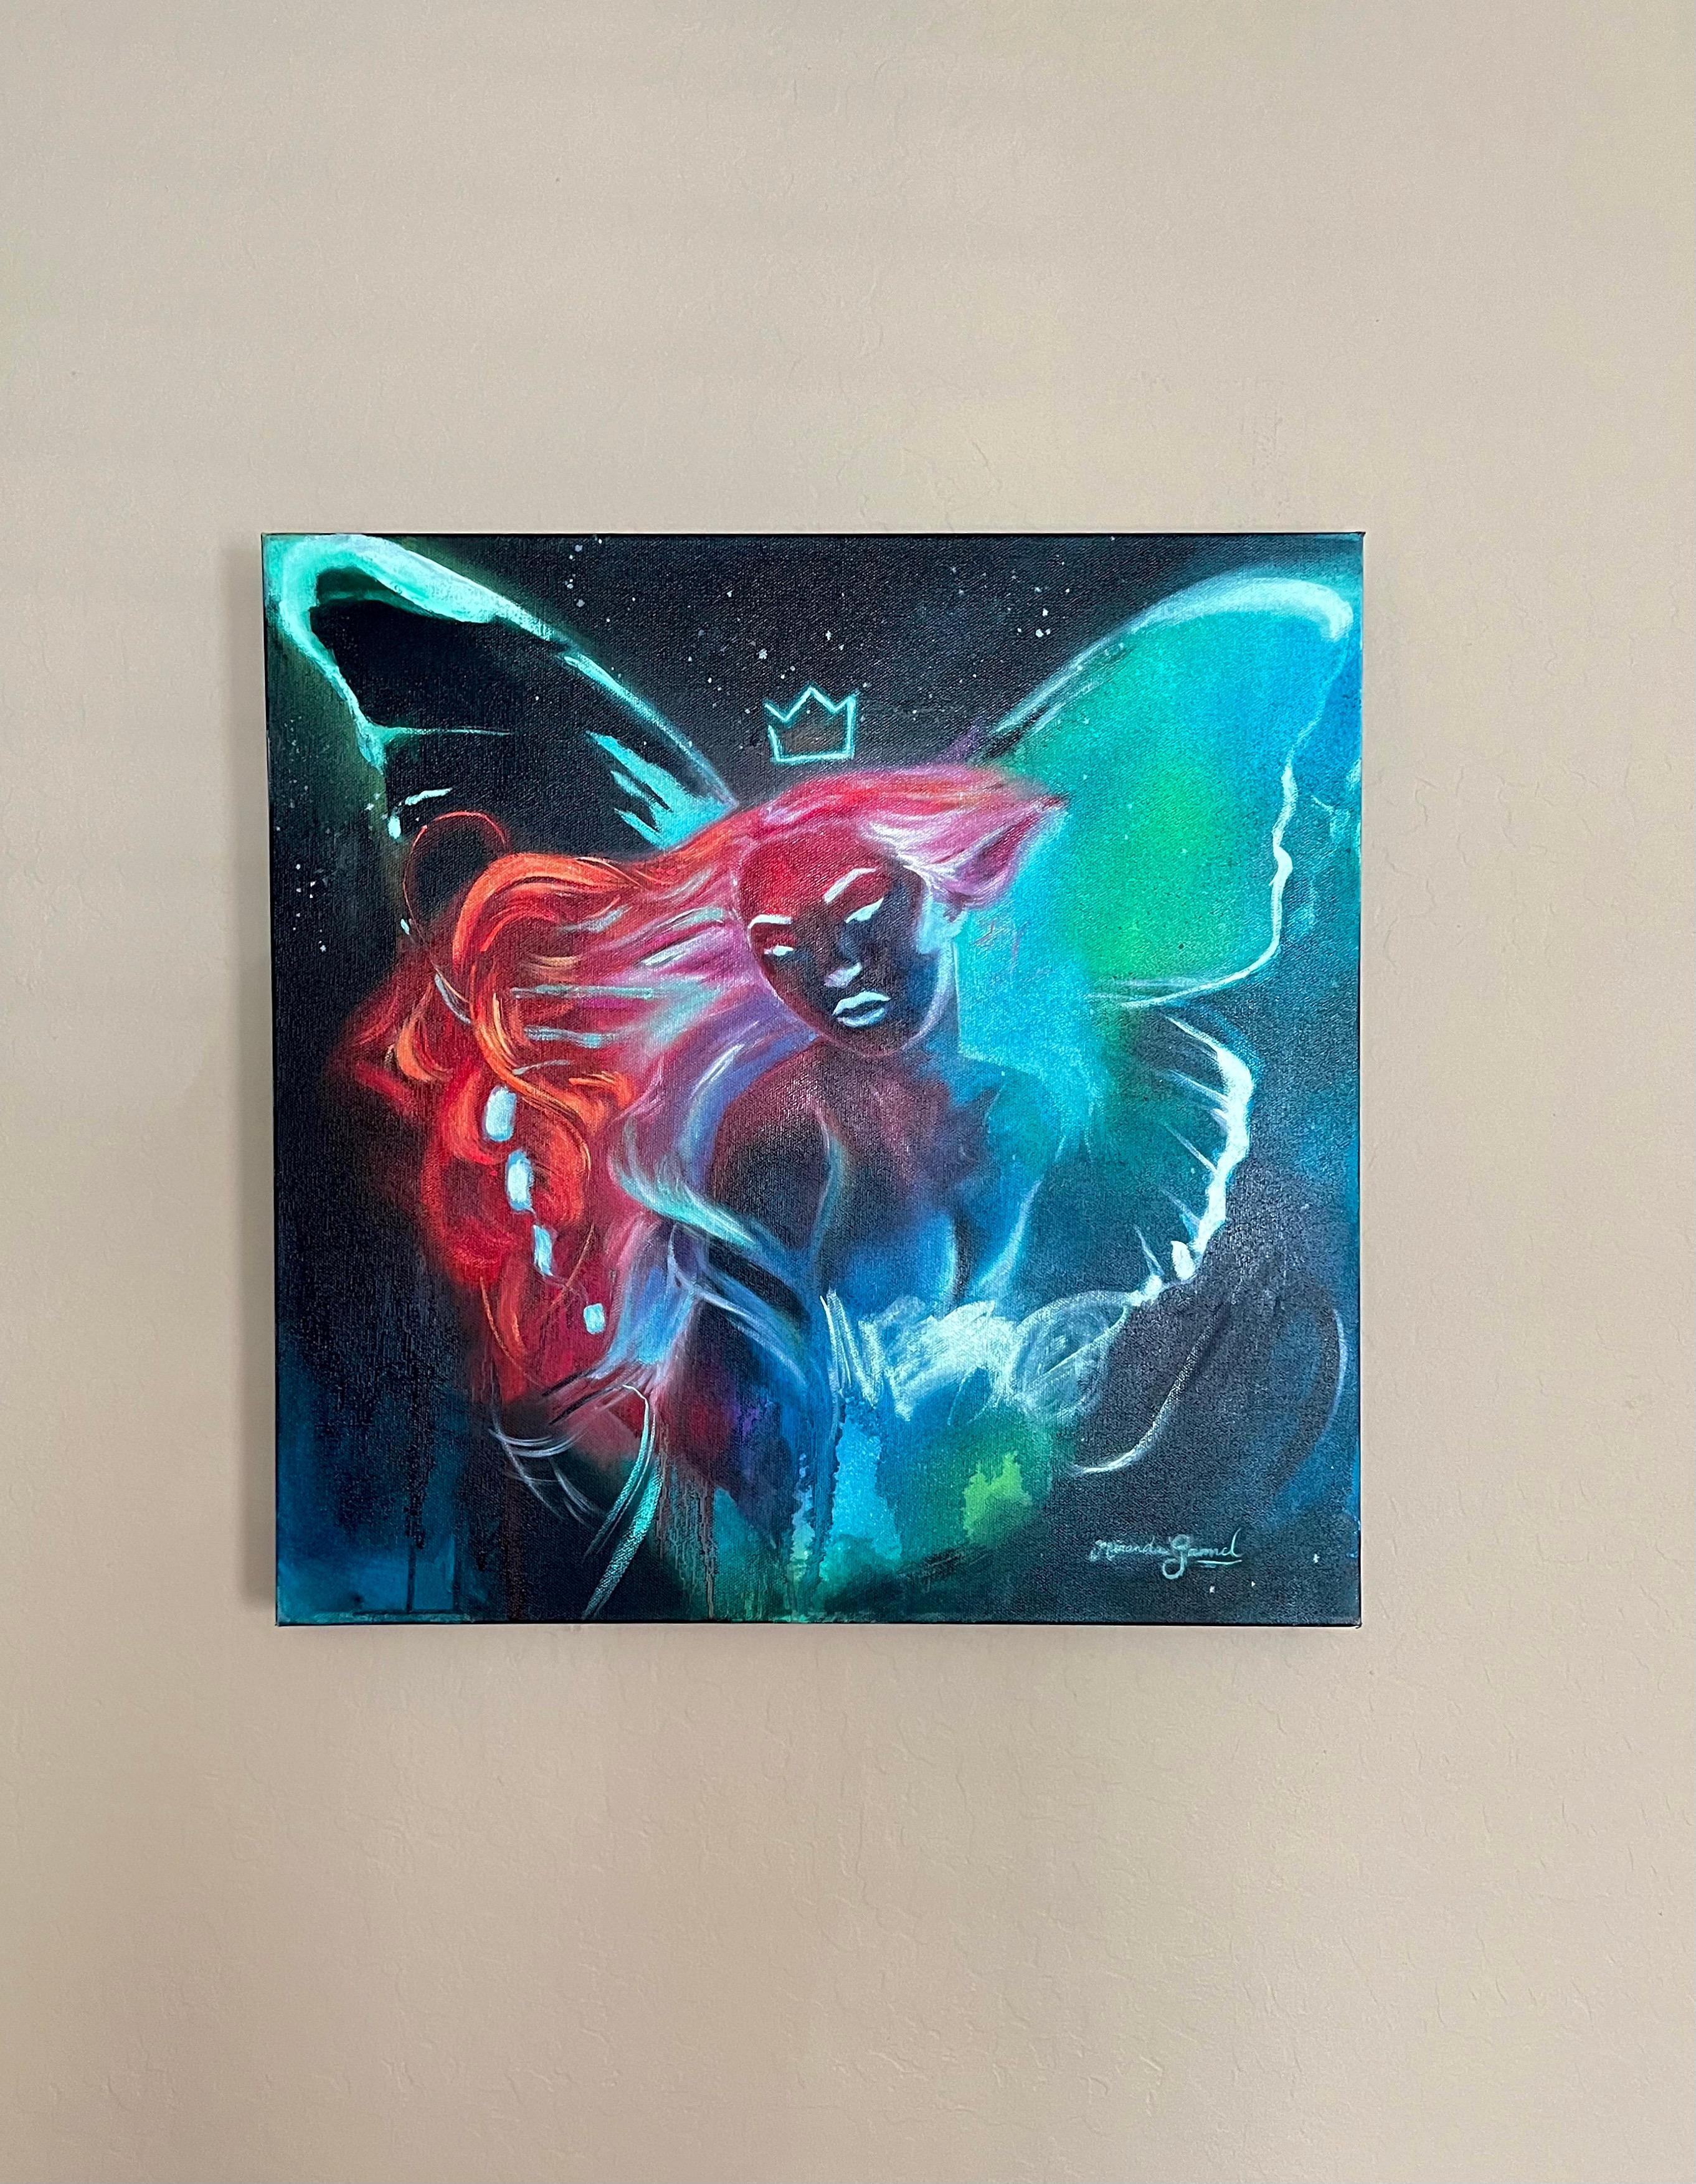 <p>Artist Comments<br>Artist Miranda Gamel depicts an ethereal being with a glowing crown and wings. Star nebulas and light beams surround her in lustrous prismatic hues. The nude figure glimmers with flowing red hair and a mix of blue and fuschia